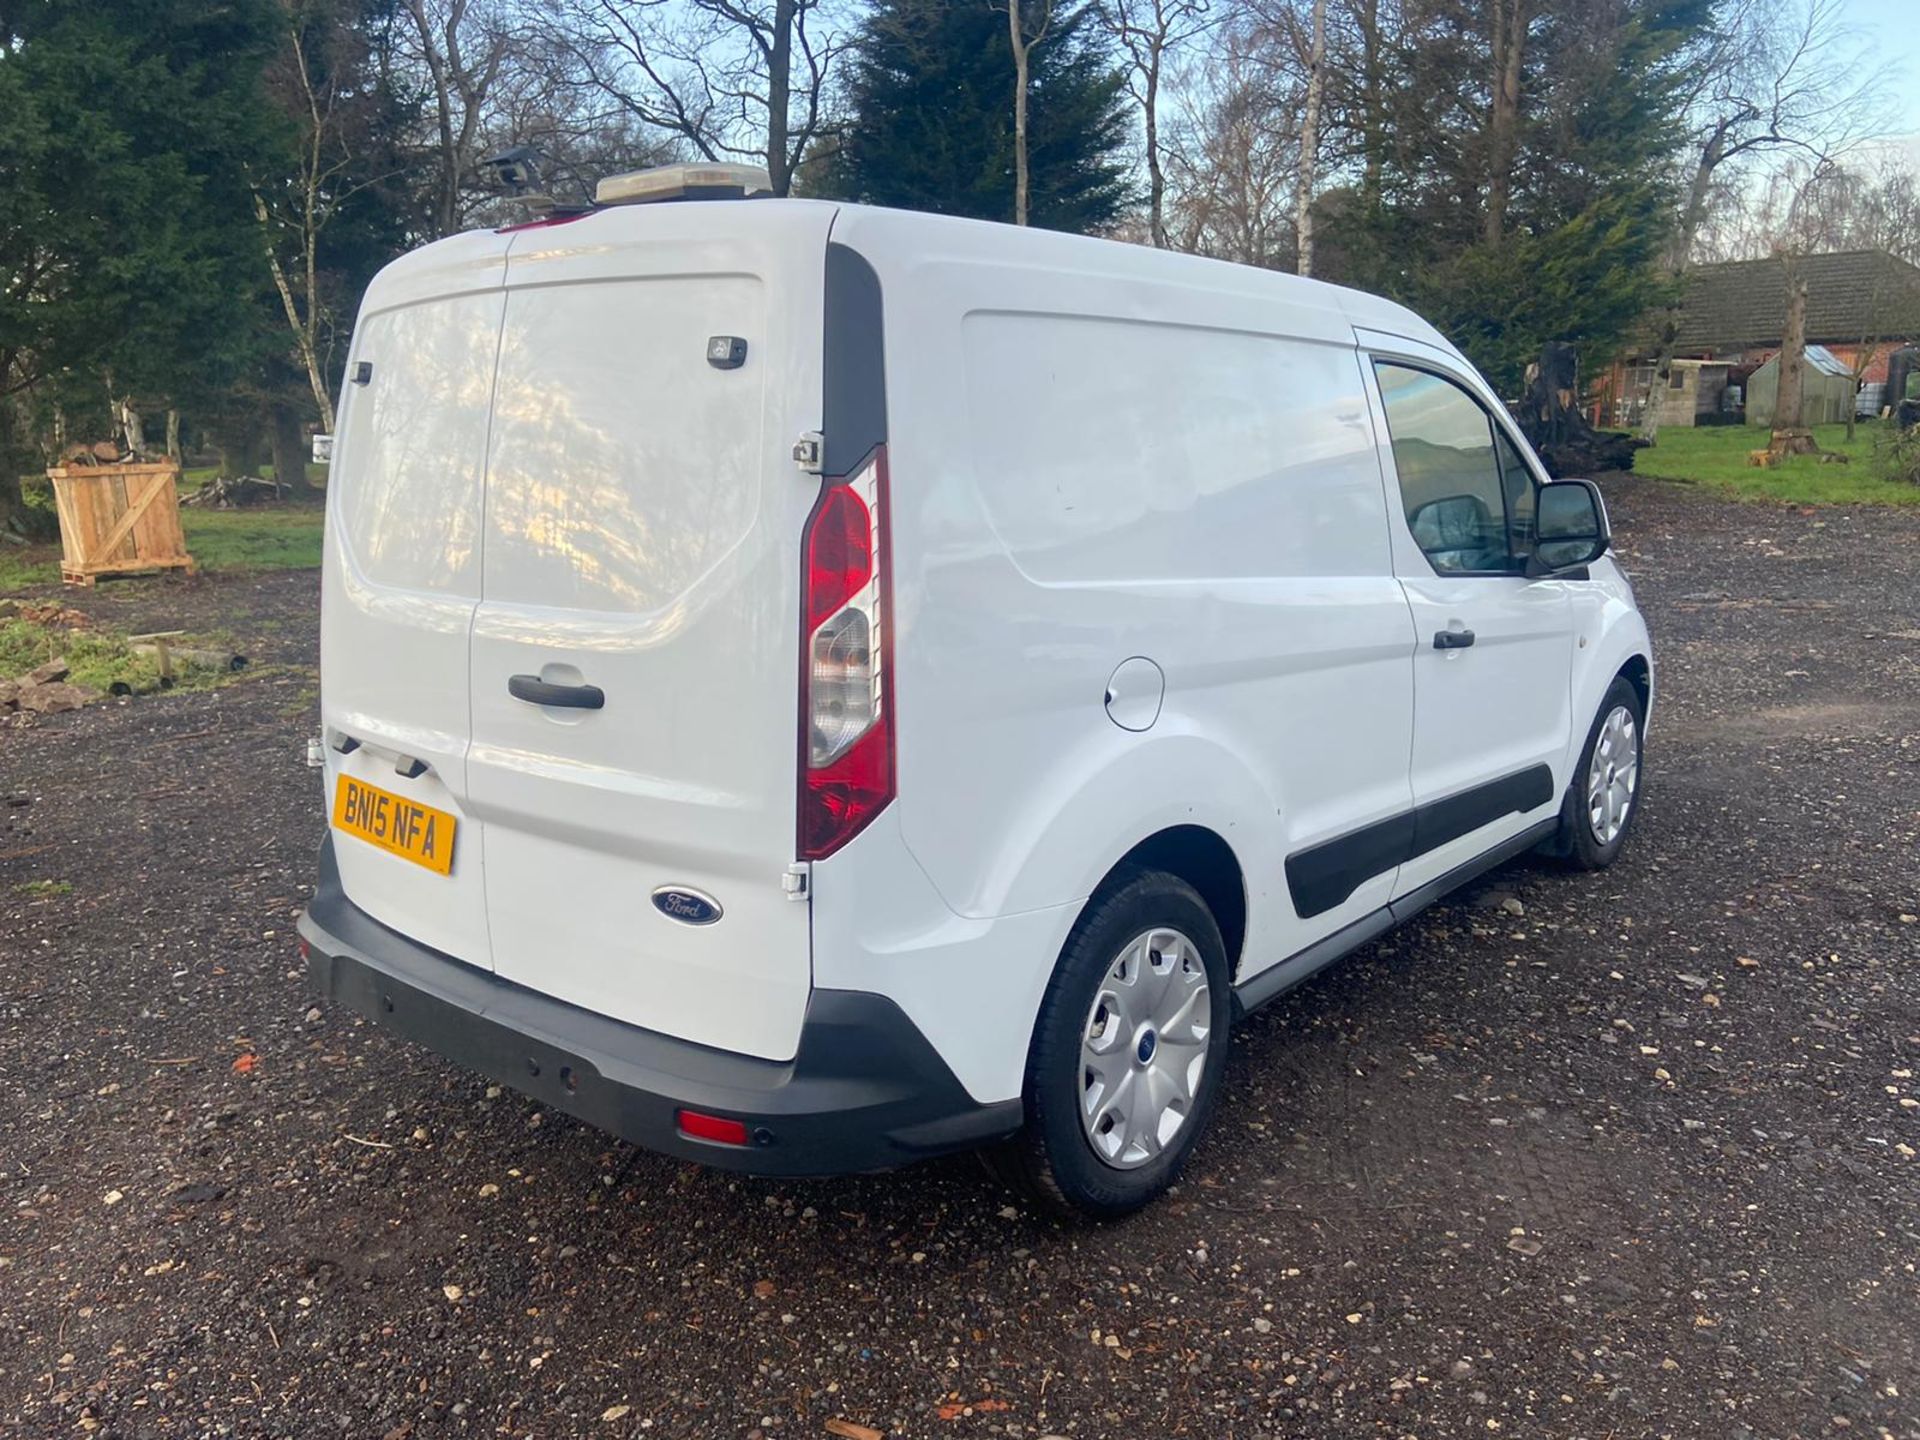 2015/15 REG FORD TRANSIT CONNECT 200 ECONETIC 1.6 DIESEL WHITE PANEL VAN, SHOWING 0 FORMER KEEPERS - Image 7 of 11